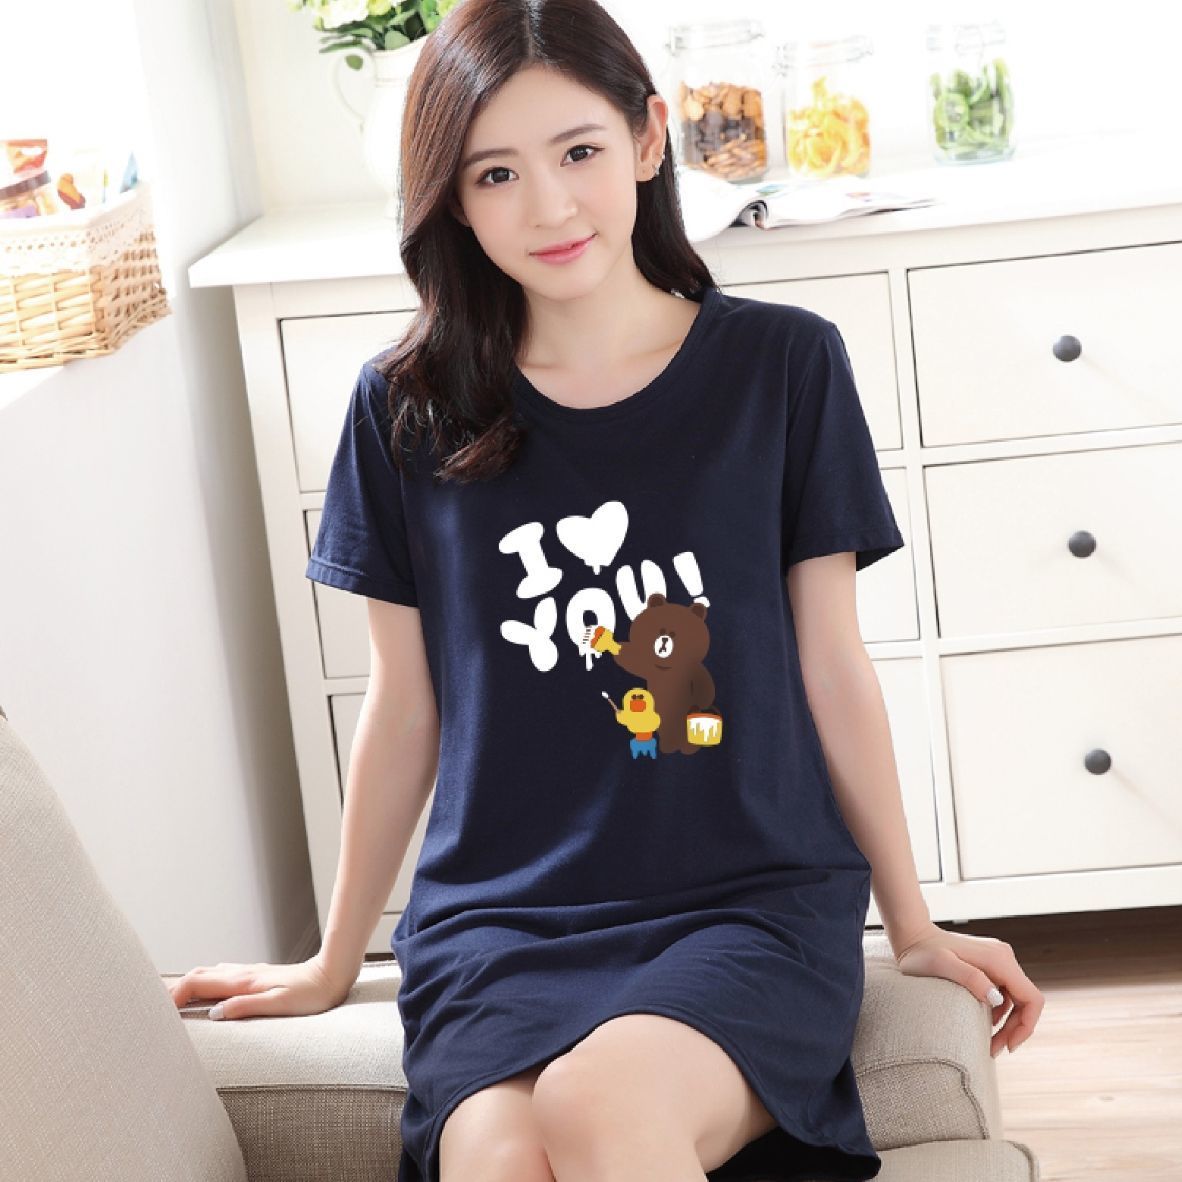 Modal nightdress summer short-sleeved cotton silk loose plus fat plus size pajamas with chest pad ladies home clothes